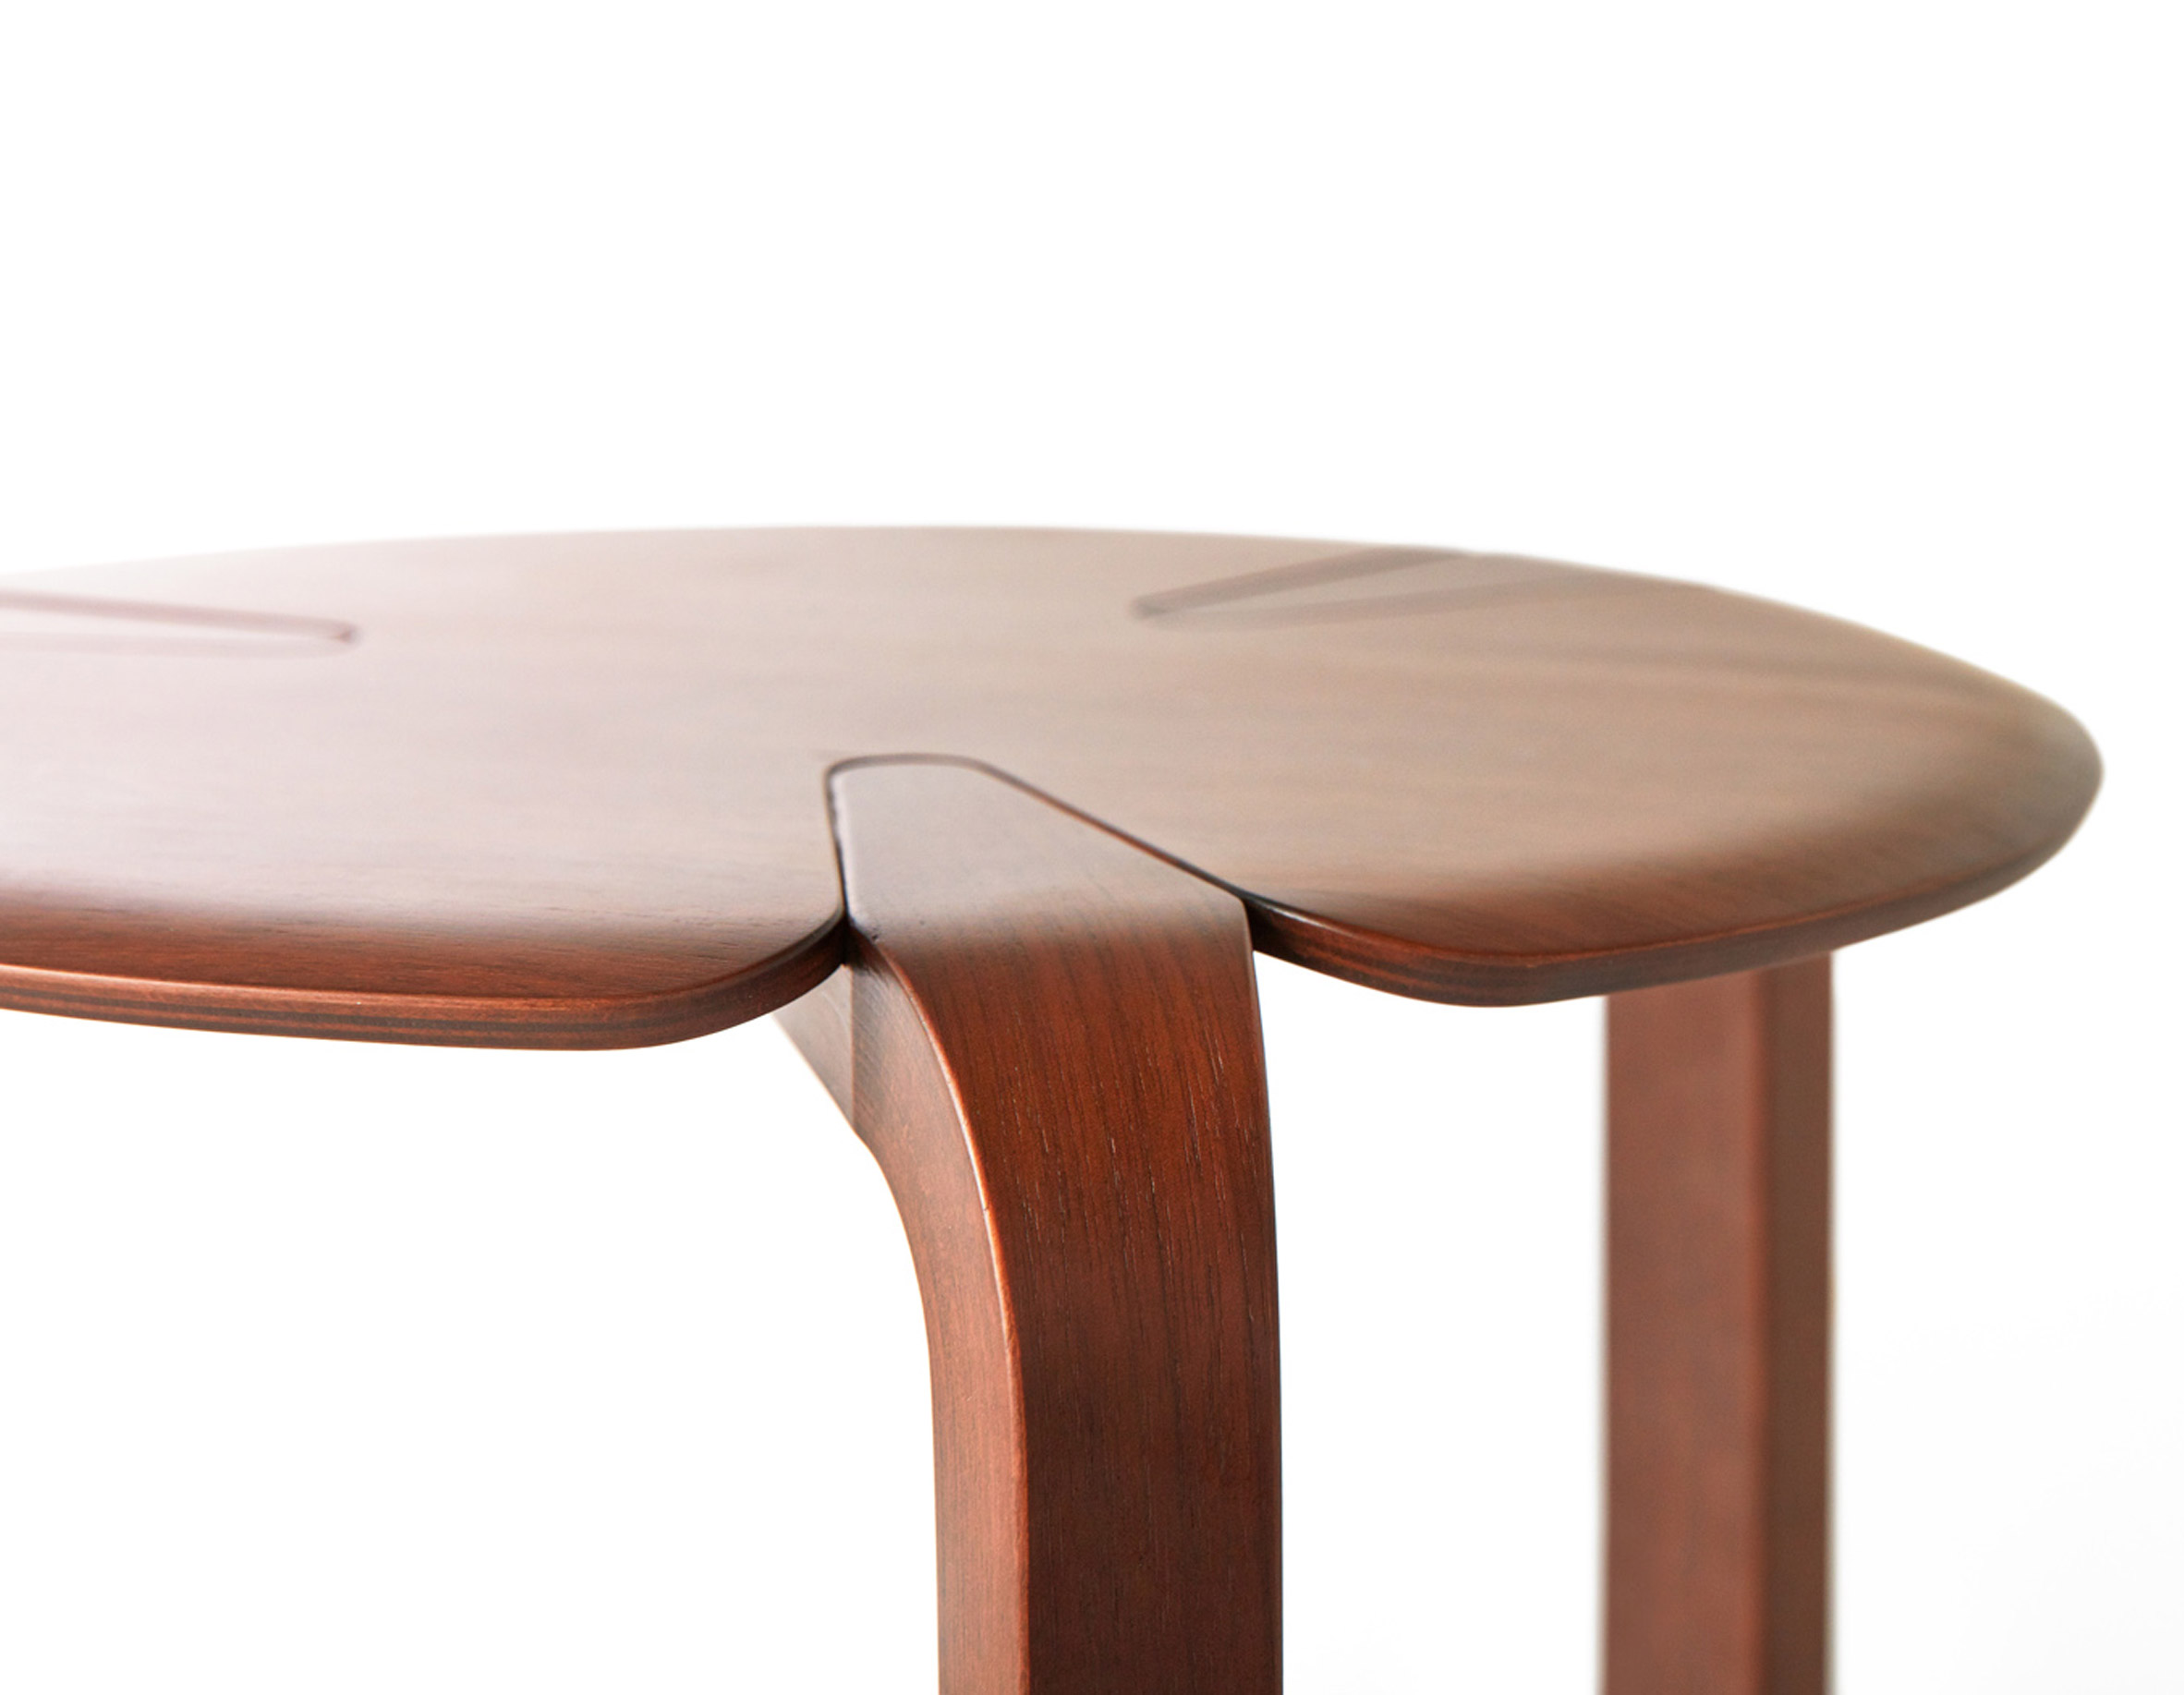 Clover stools for TAIYOU&C Japan - written